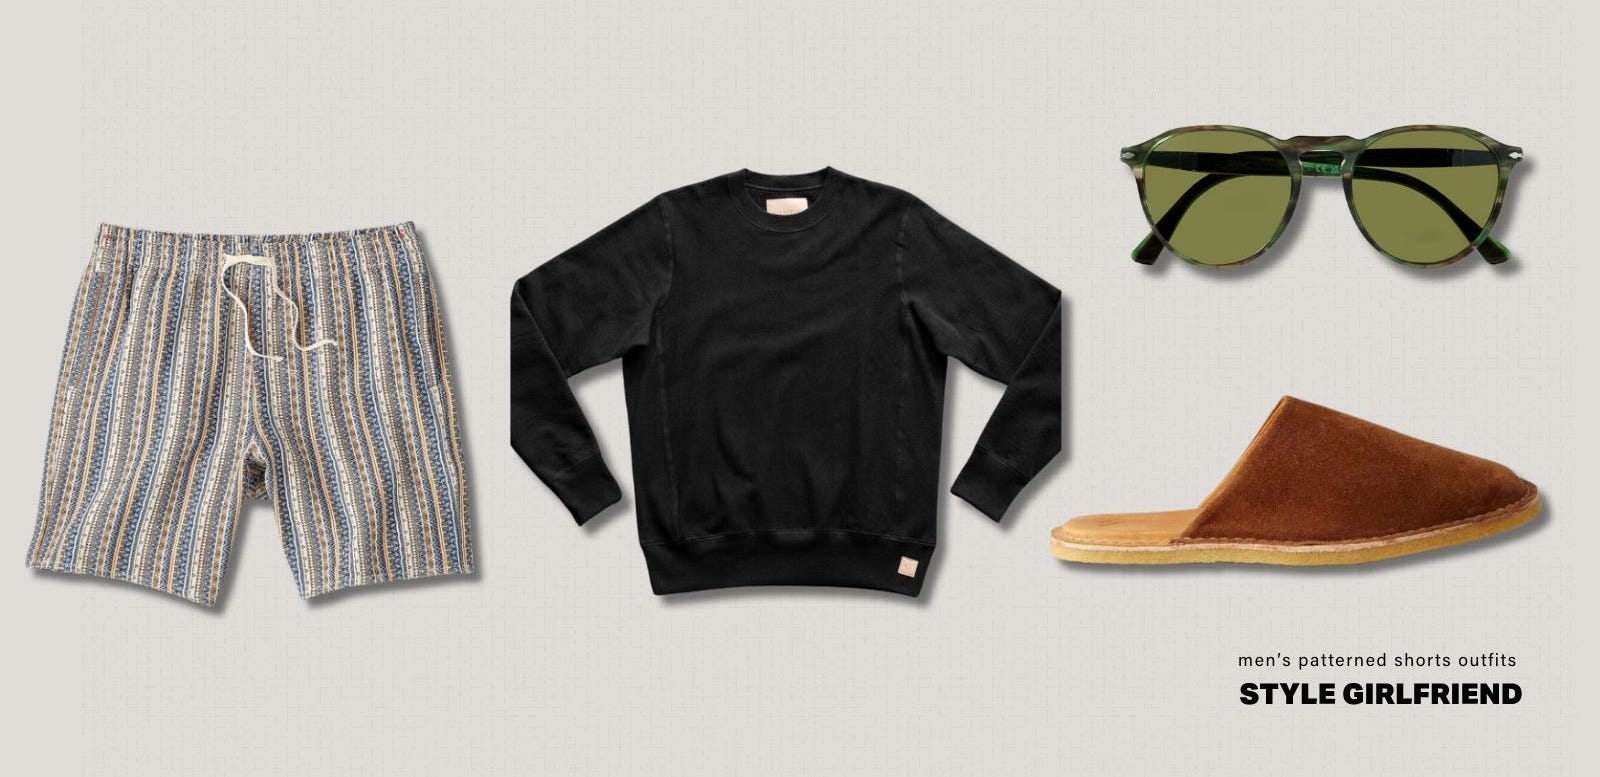 flat lay of men's casual shorts outfit, featuring patterned shorts, a black crewneck sweatshirt, slip-on shoes, and green-rimmed sunglasses